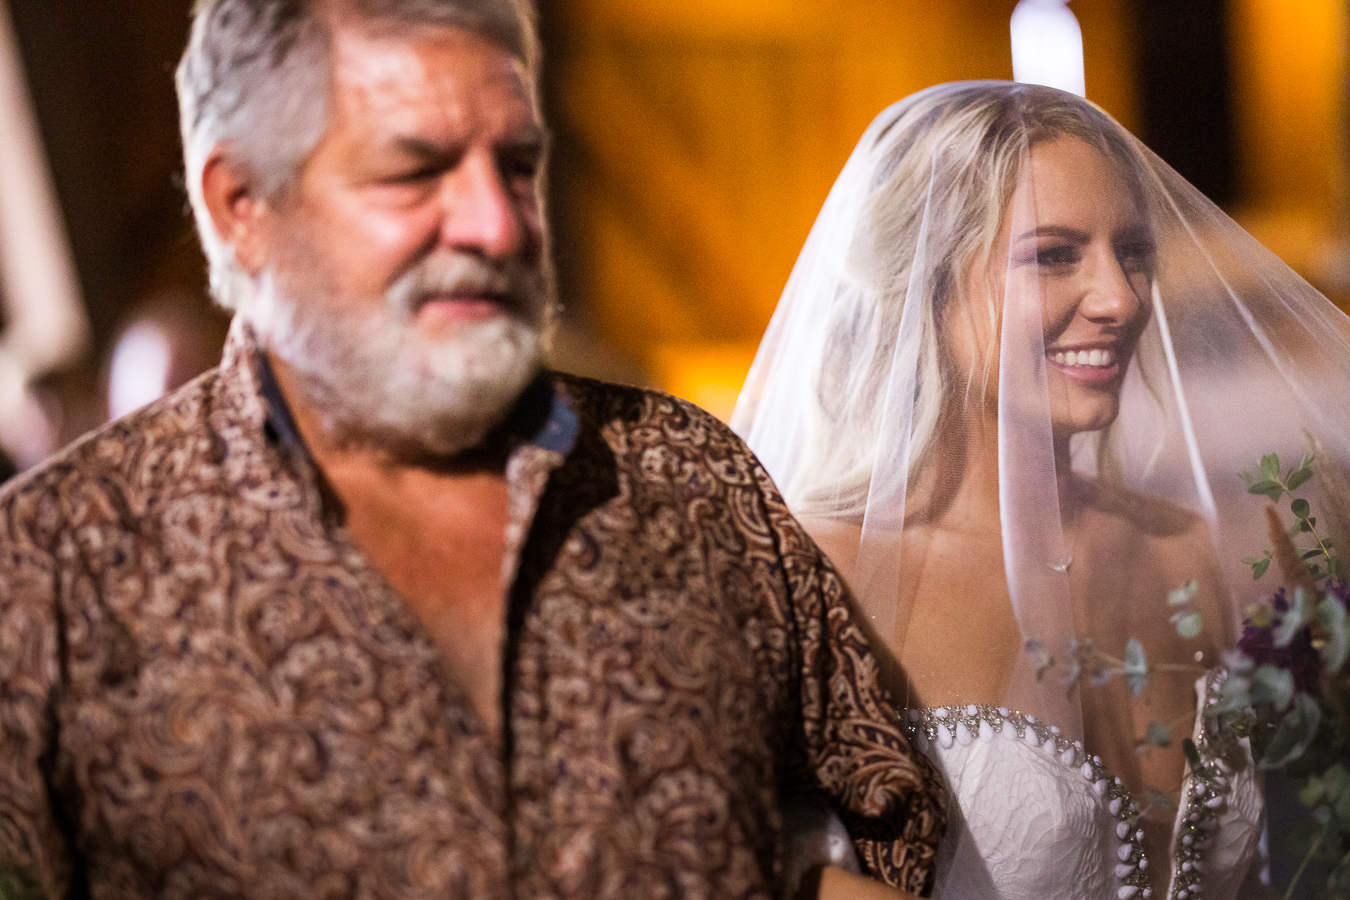 candid wedding photographer, rhinehart photography, captures this image of the bride as she smiles at her groom as her dad walks her down the aisle during this country barn wedding ceremony 